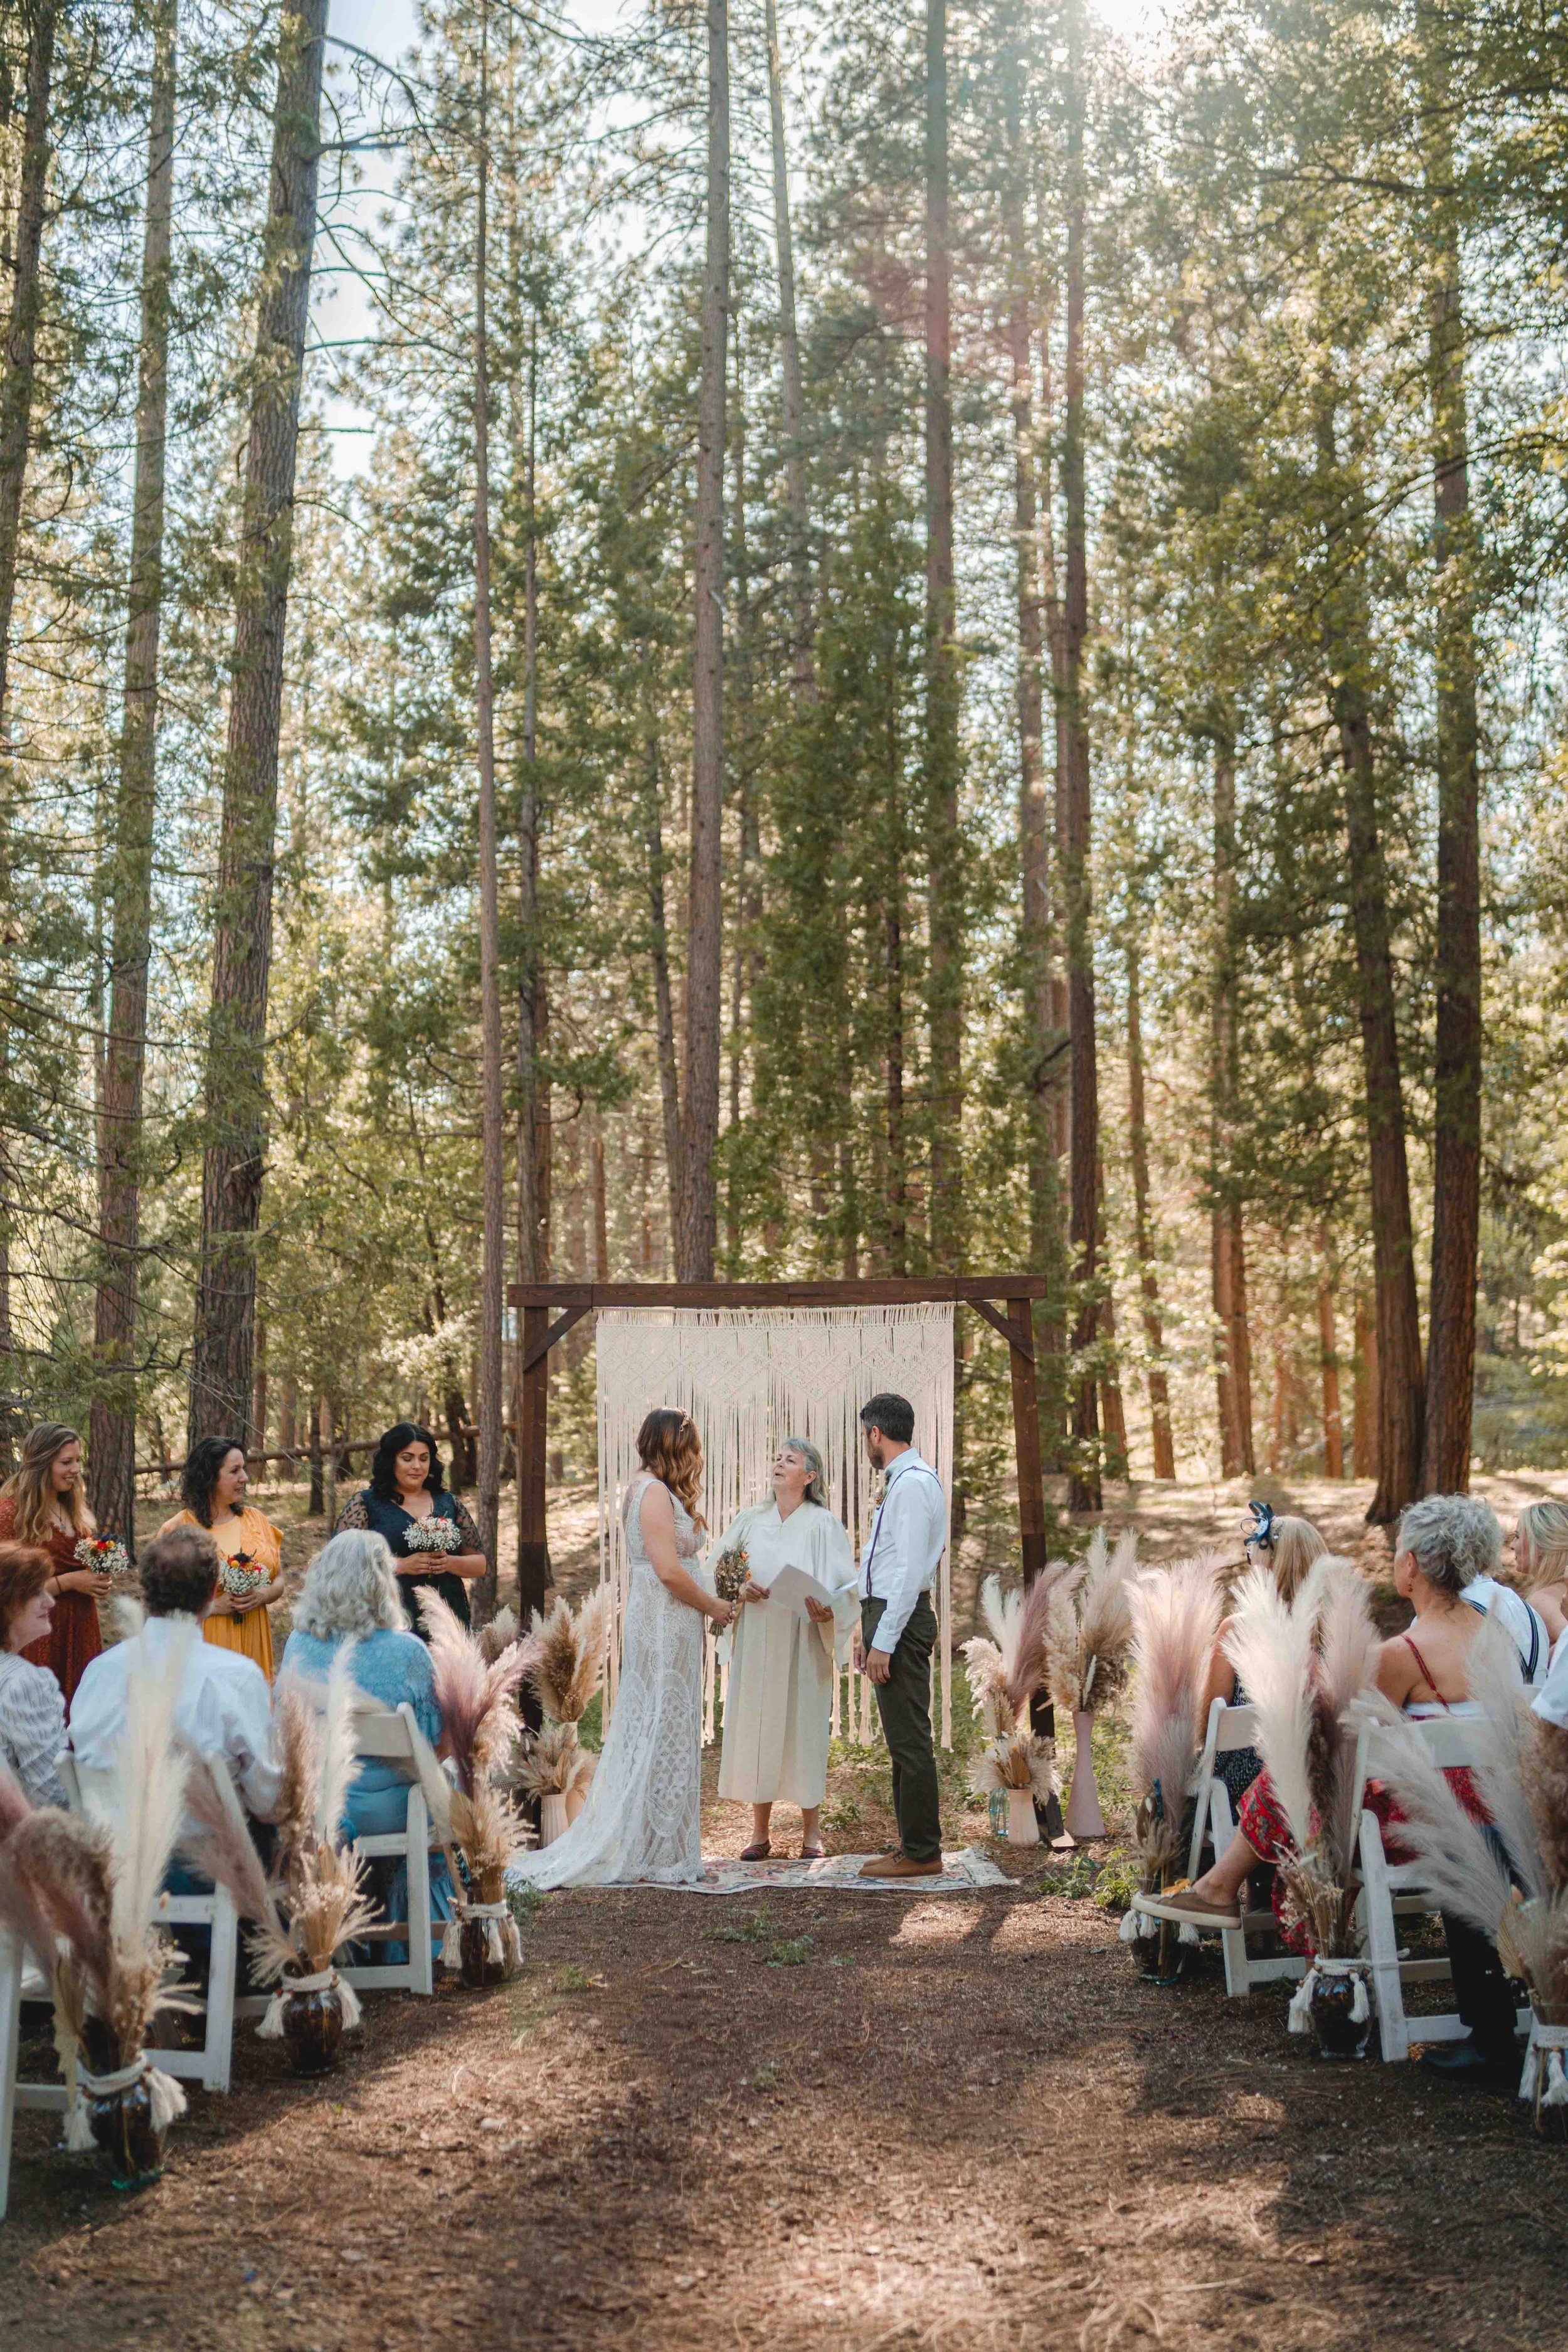 The couple holding hands at the end of the aisle